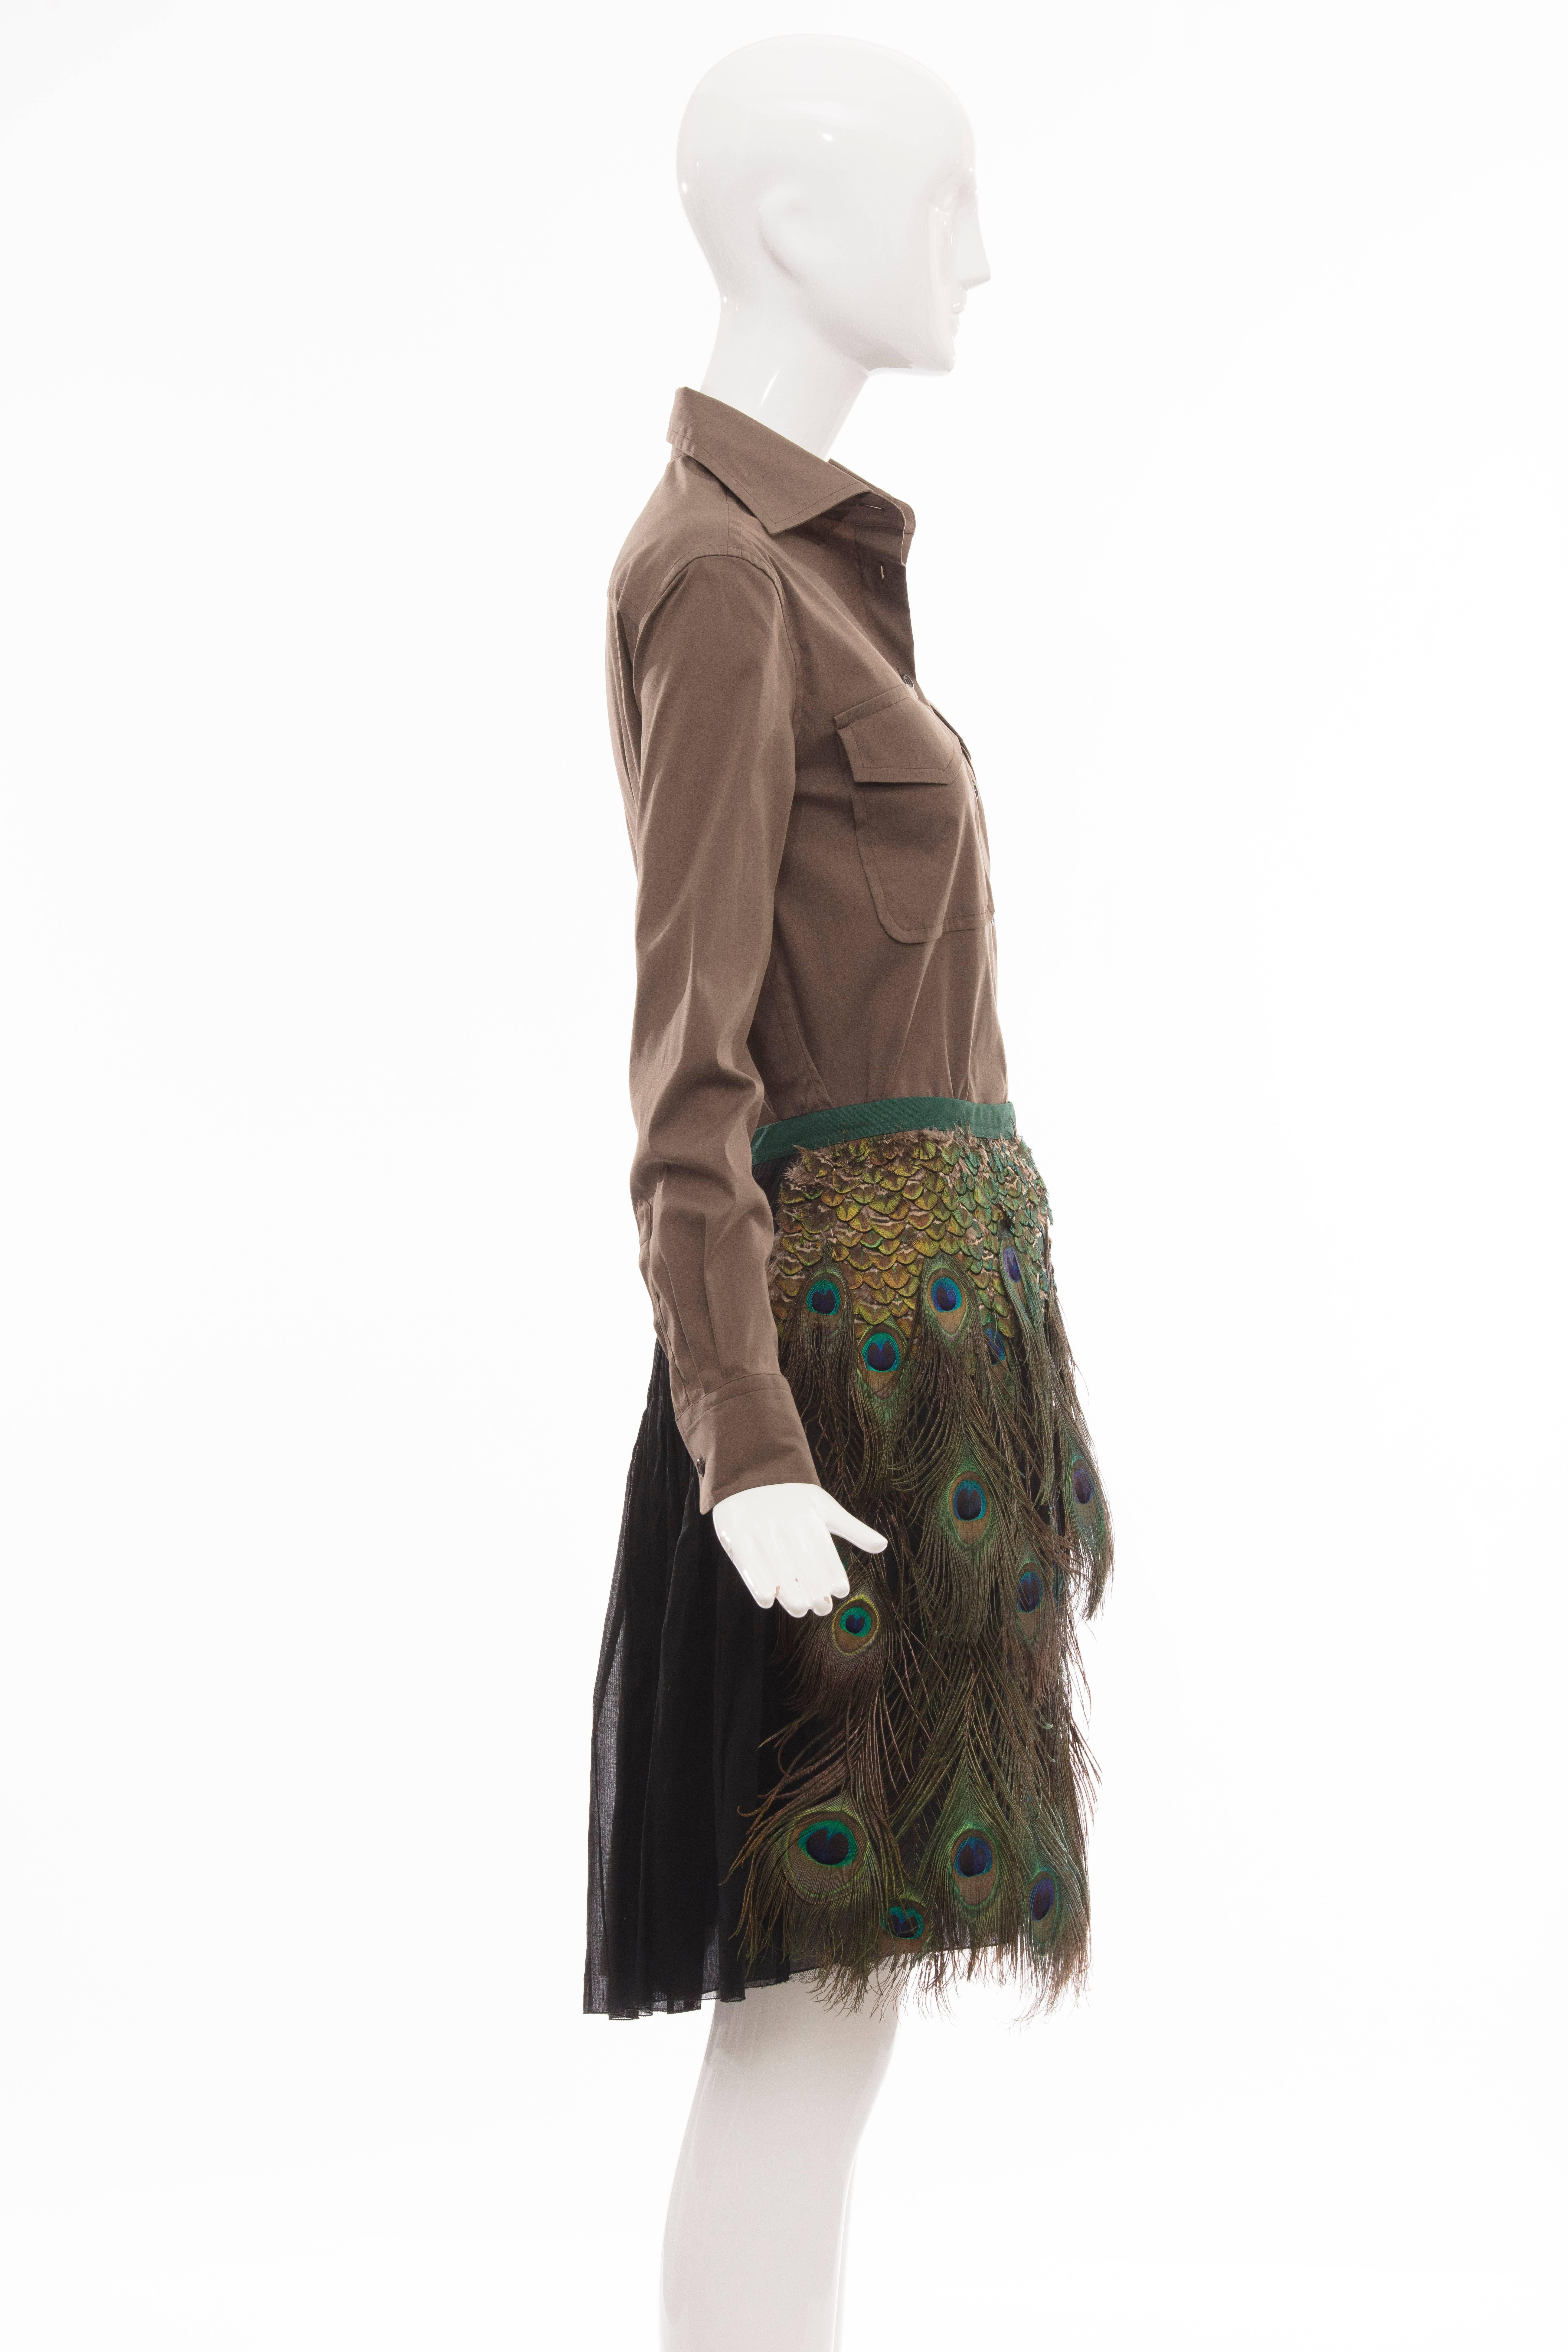 Women's Prada Runway Cotton Button Front Top & Peacock Feather A-Line Skirt, Spring 2005 For Sale